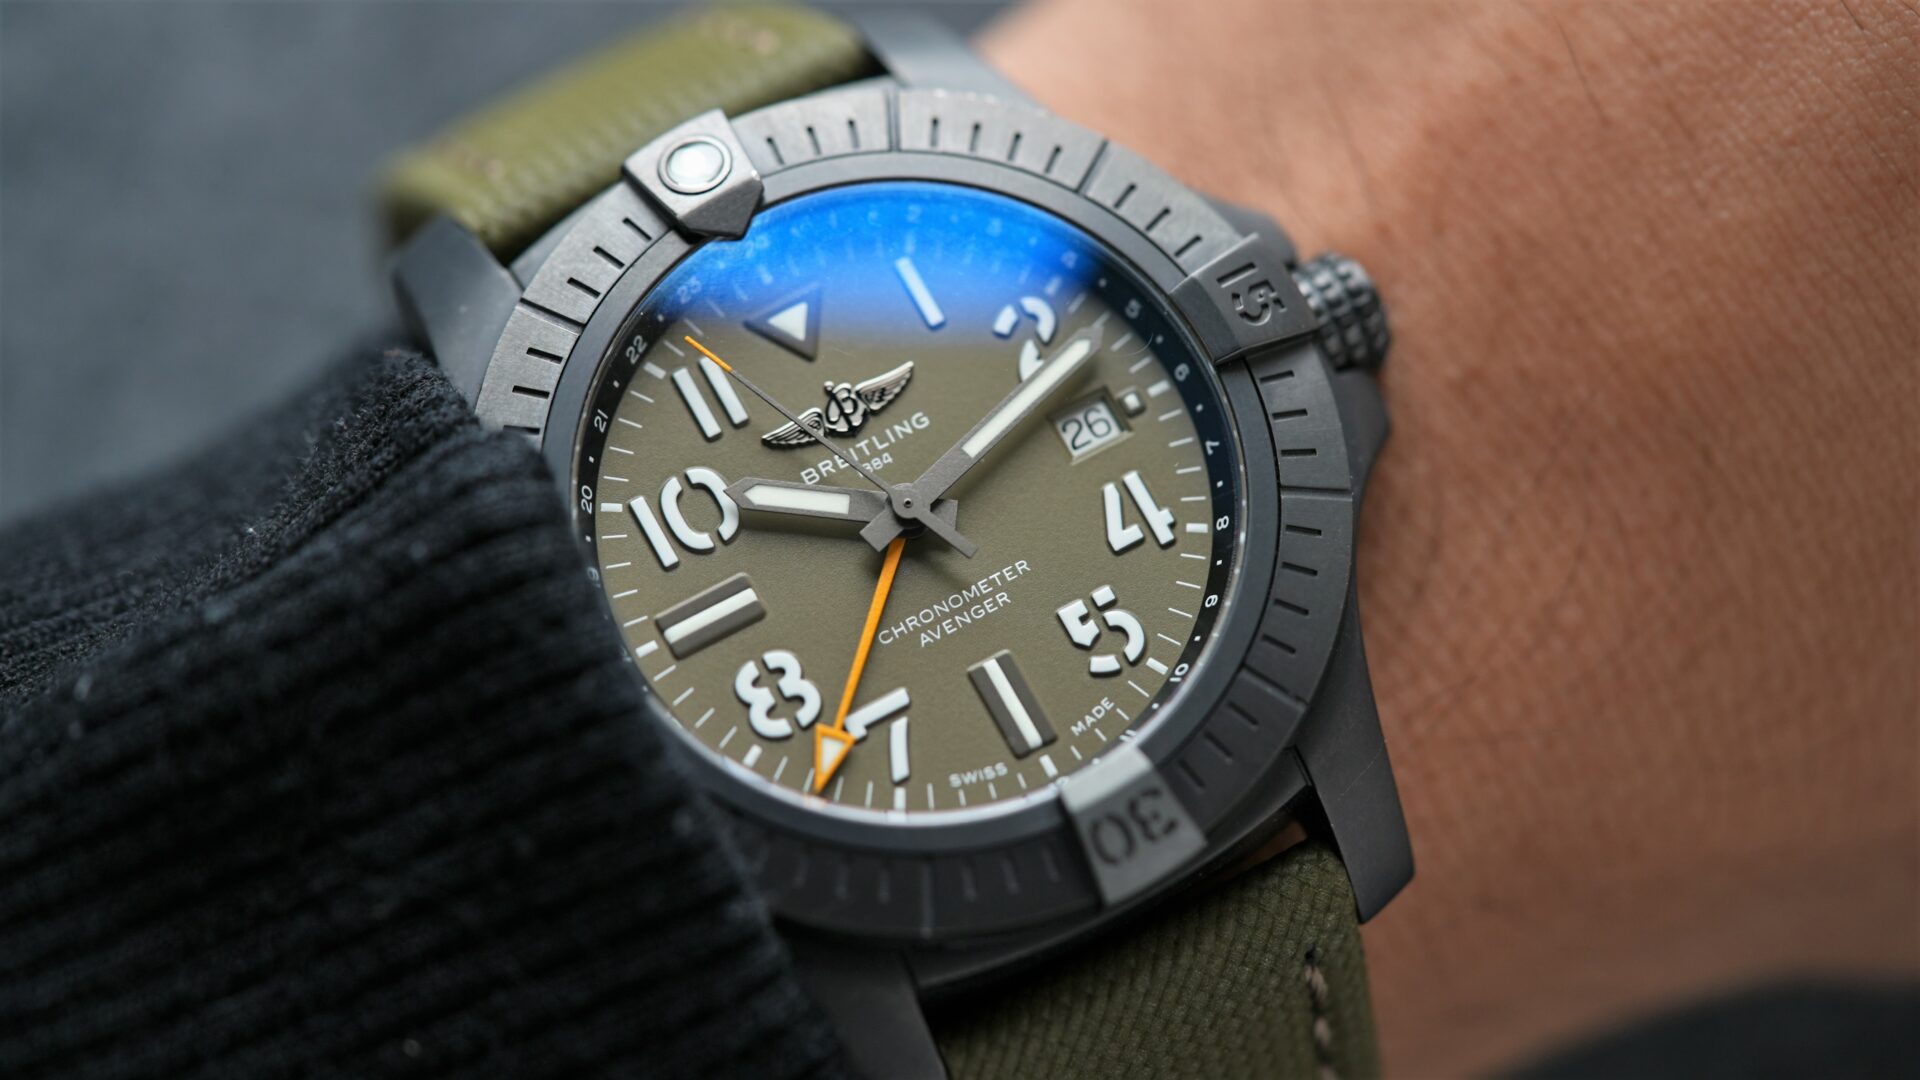 Breitling Avenger Automatic Gmt 45 Night Mission Limited V323952A1L1X1 wristwatch featured on the wrist.